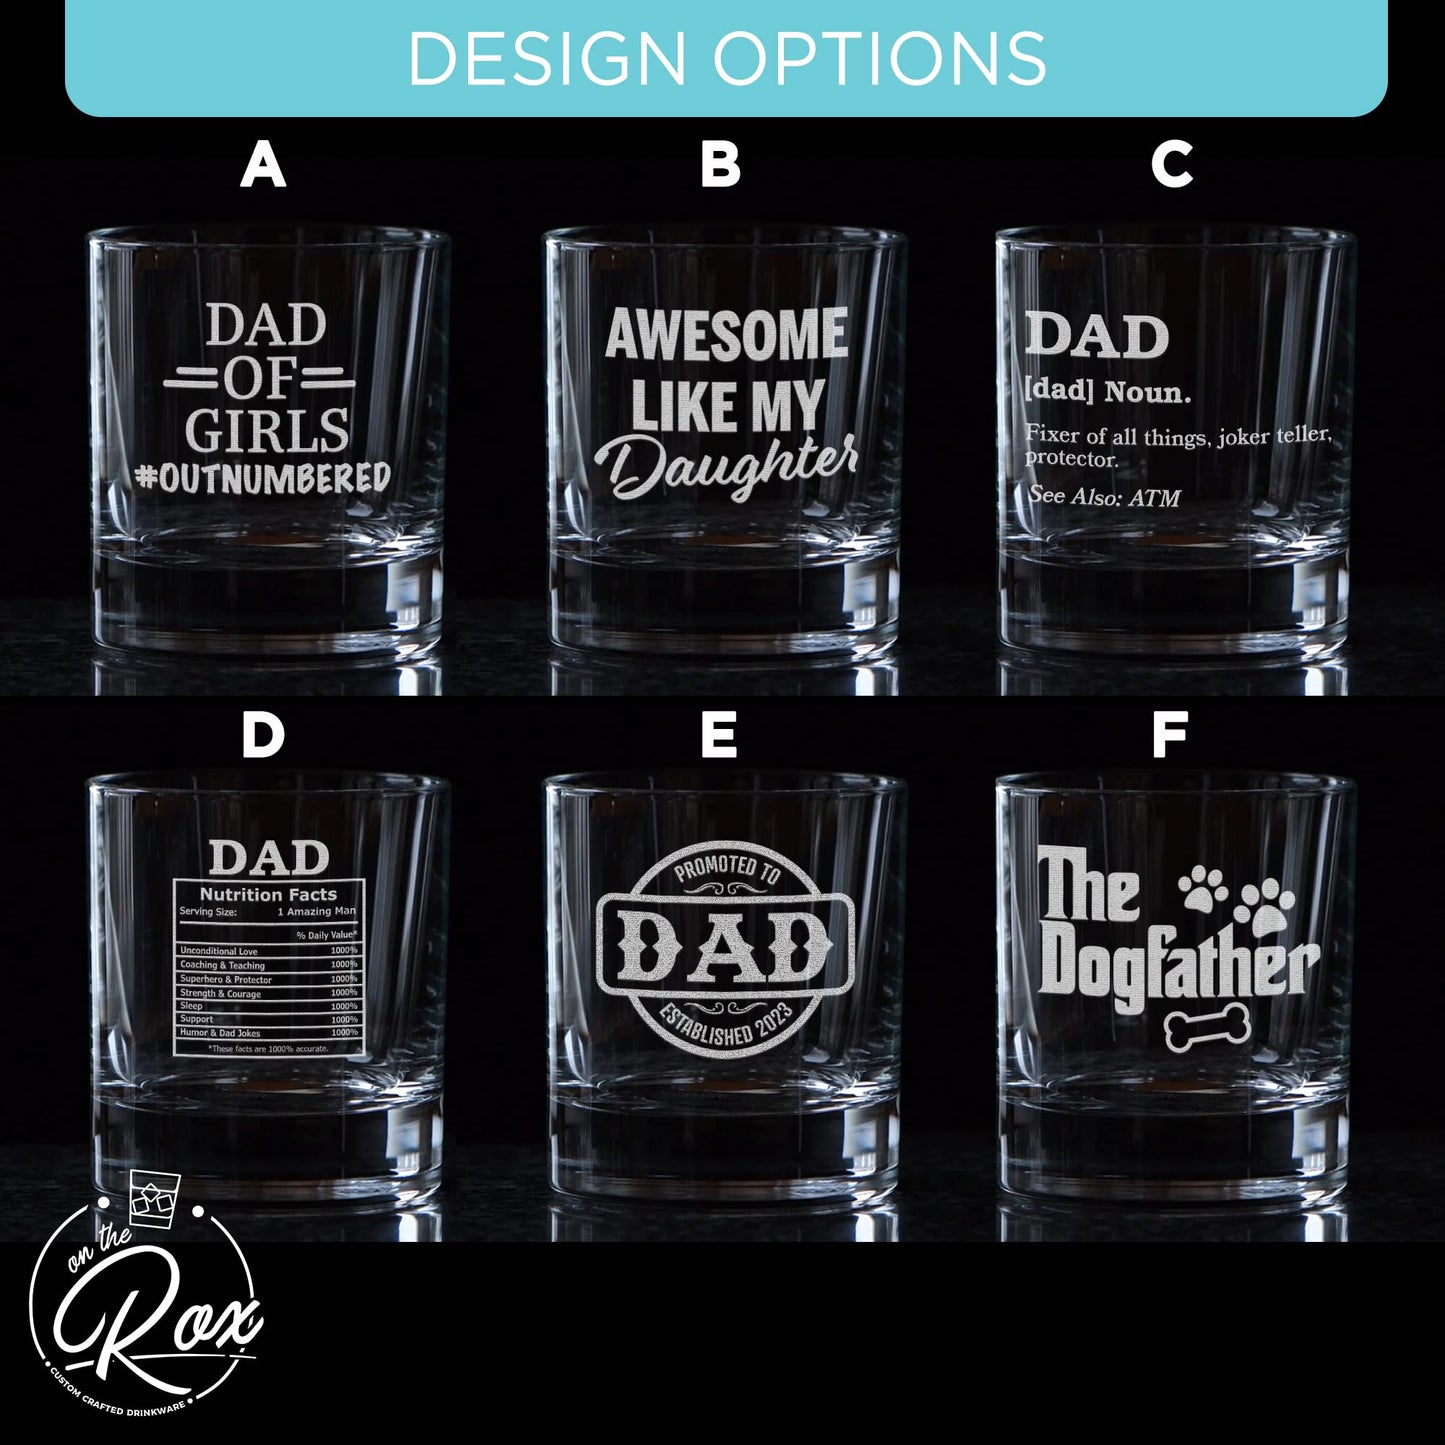 Whiskey Gifts for Dad- 11 Oz "Dad of Girls" Engraved Whiskey Glass - Father's Day Gift, Dad Birthday Gifts From Daughter, Wife or Son - Dad Bourbon Glass - Old Fashion Glass - 6 Designs To Choose From